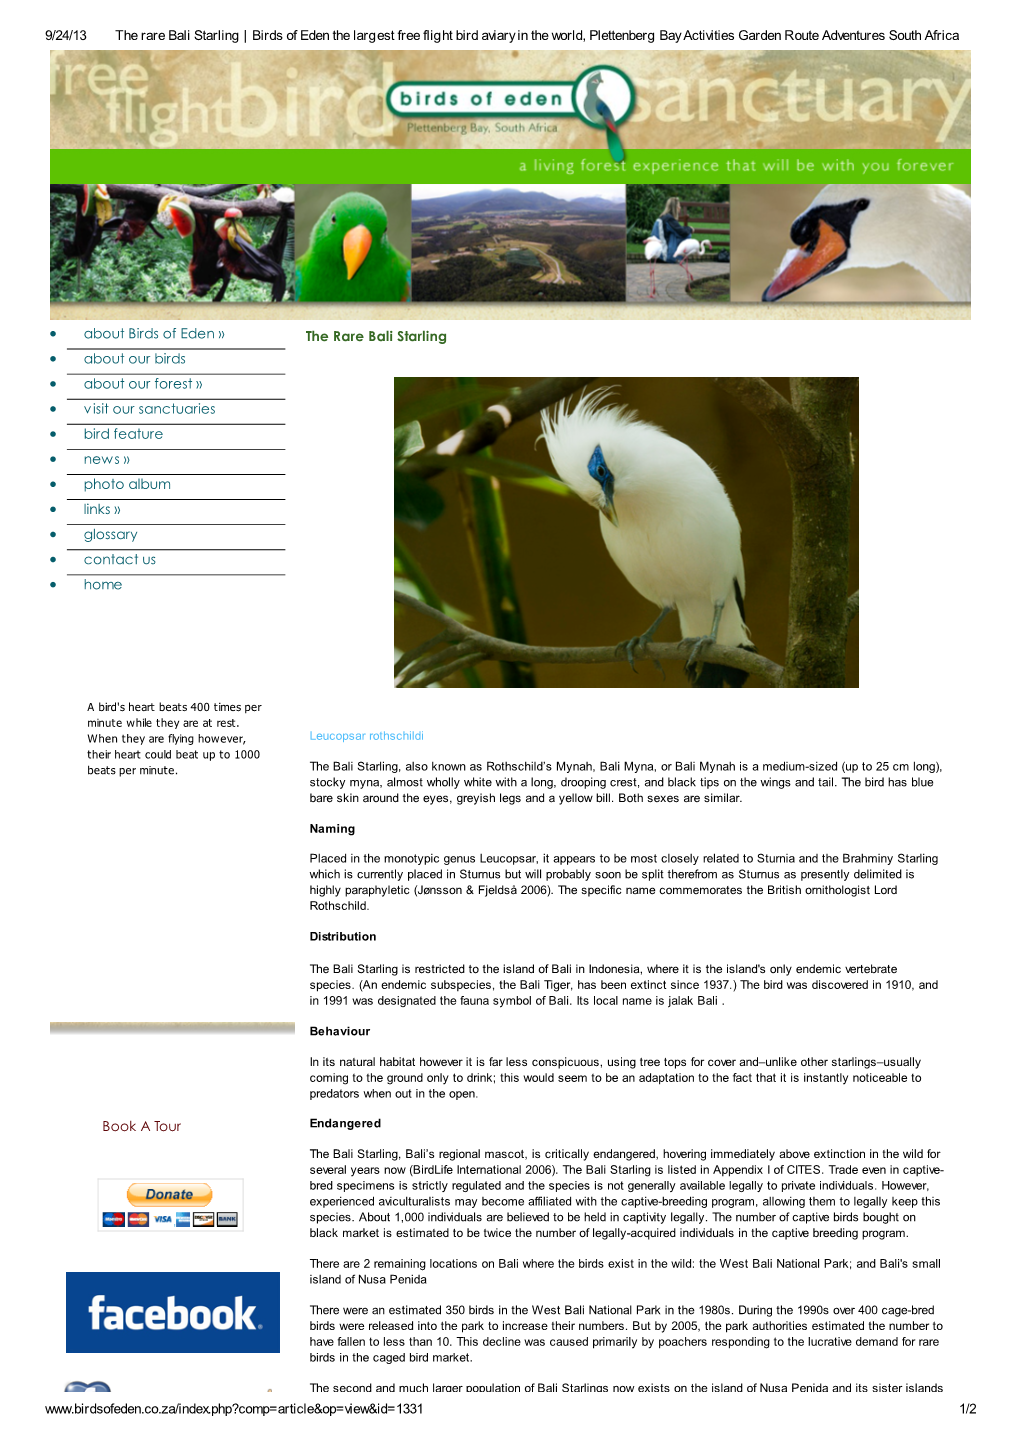 The Rare Bali Starling | Birds of Eden the Largest Free Flight Bird Aviary in the World, Plettenberg Bay Activities Garden Route Adventures South Africa